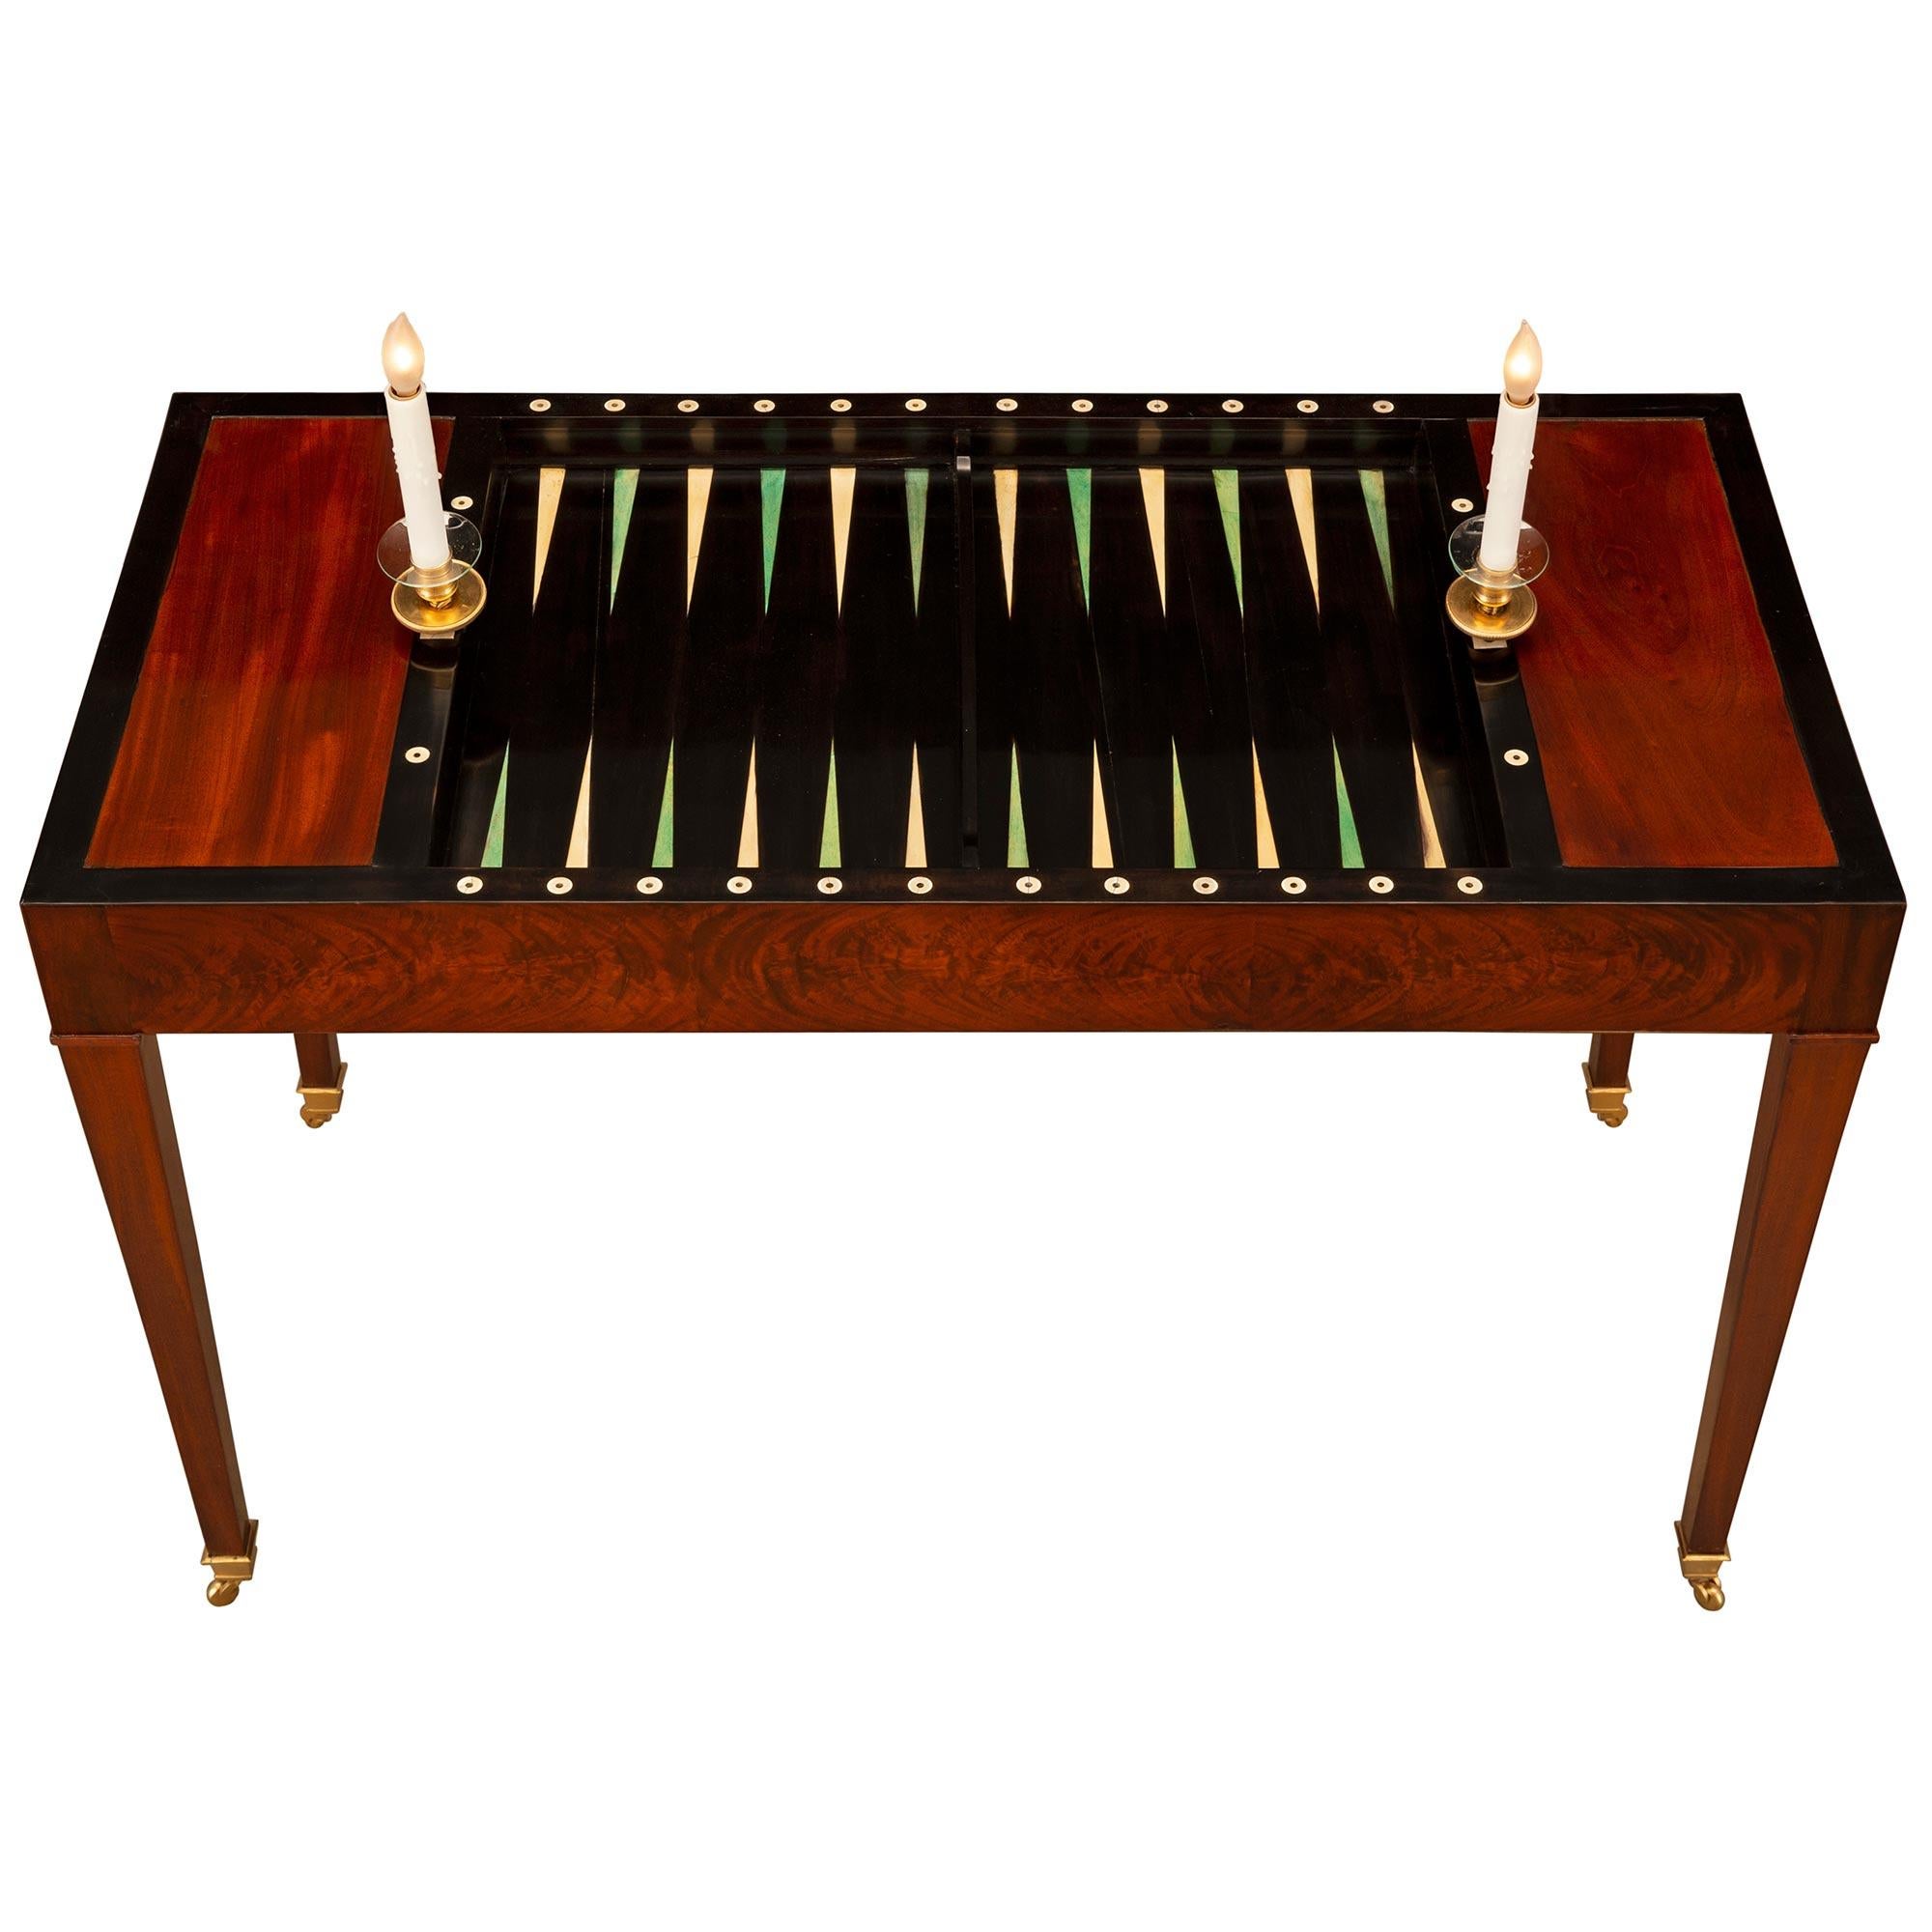 A beautiful and most elegant French late 18th century Louis XVI period Mahogany and ormolu electrified Tric Trac games table. The rectangular table is raised by square tapered legs with their original ormolu casters. The straight frieze displays